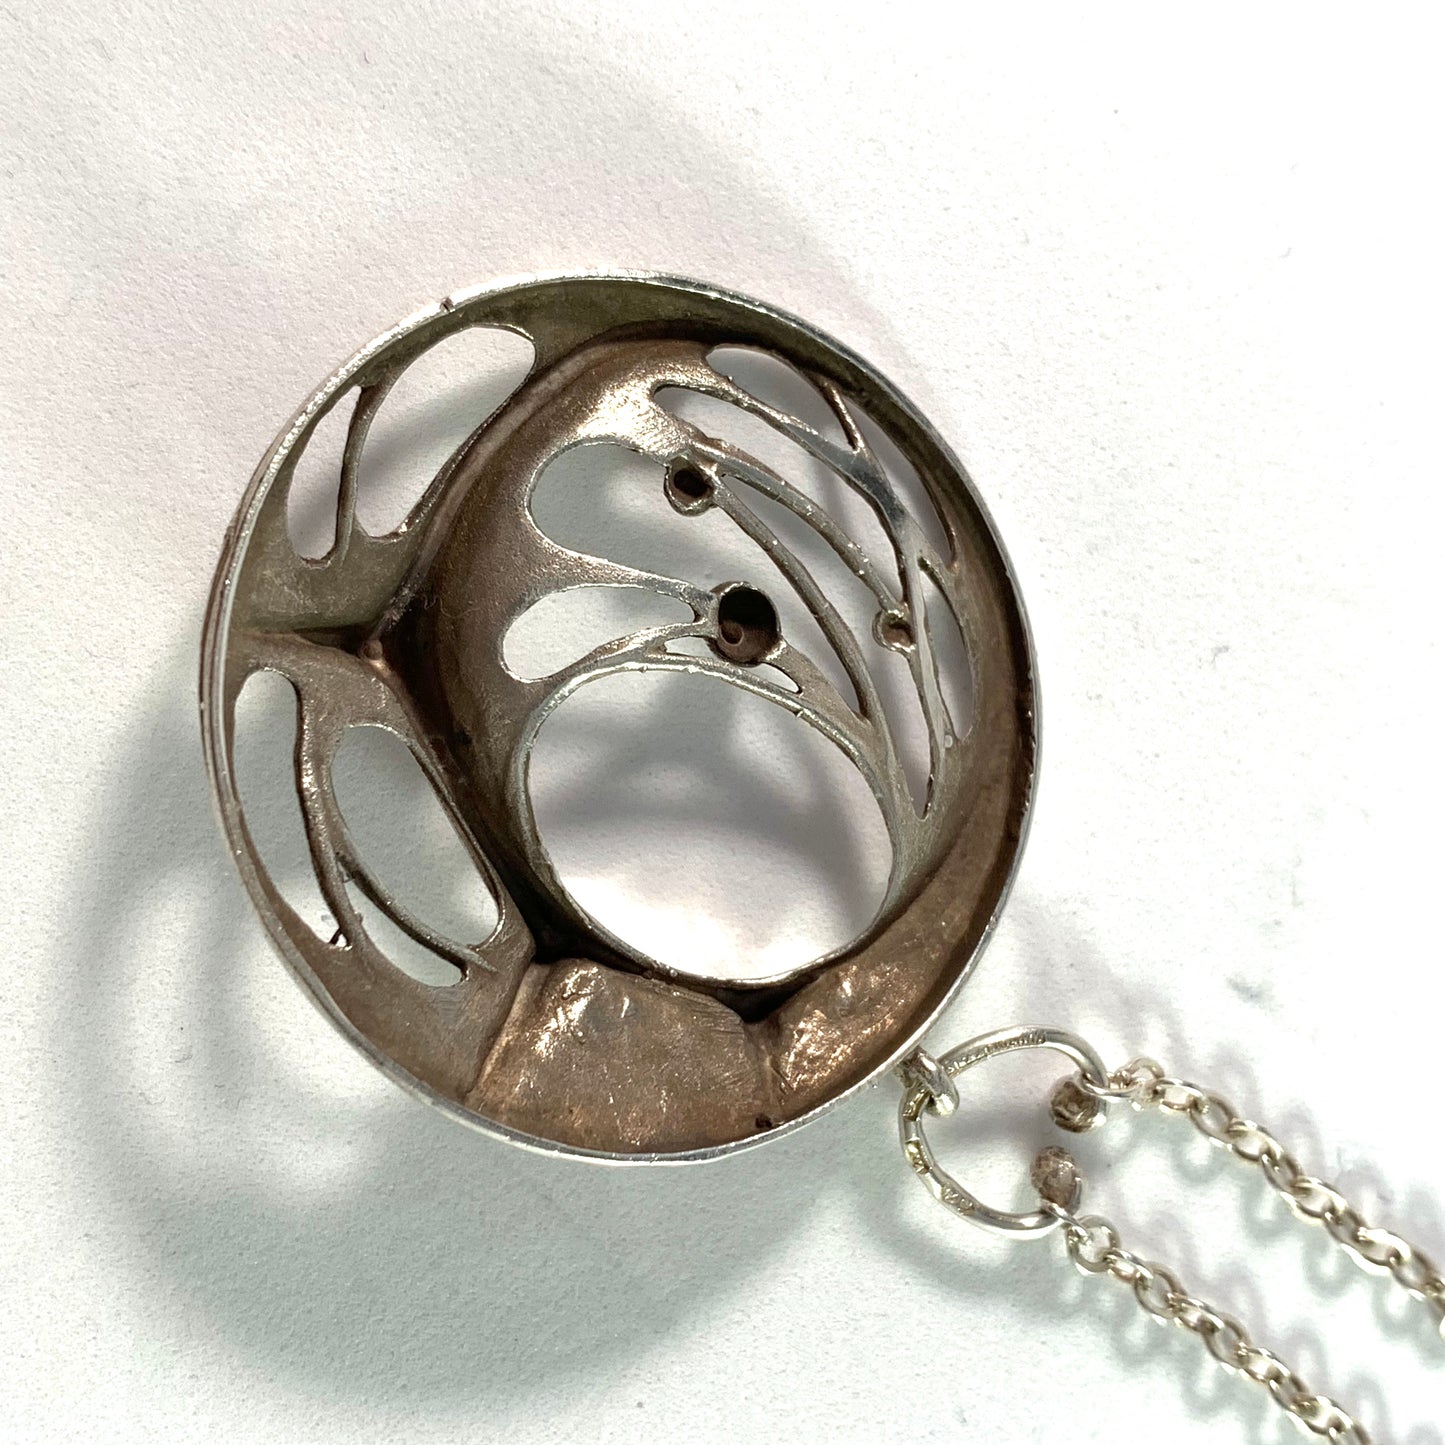 Karl Laine for Sten & Laine Finland year 1974 Sterling Silver Spider Web Pendant Necklace.